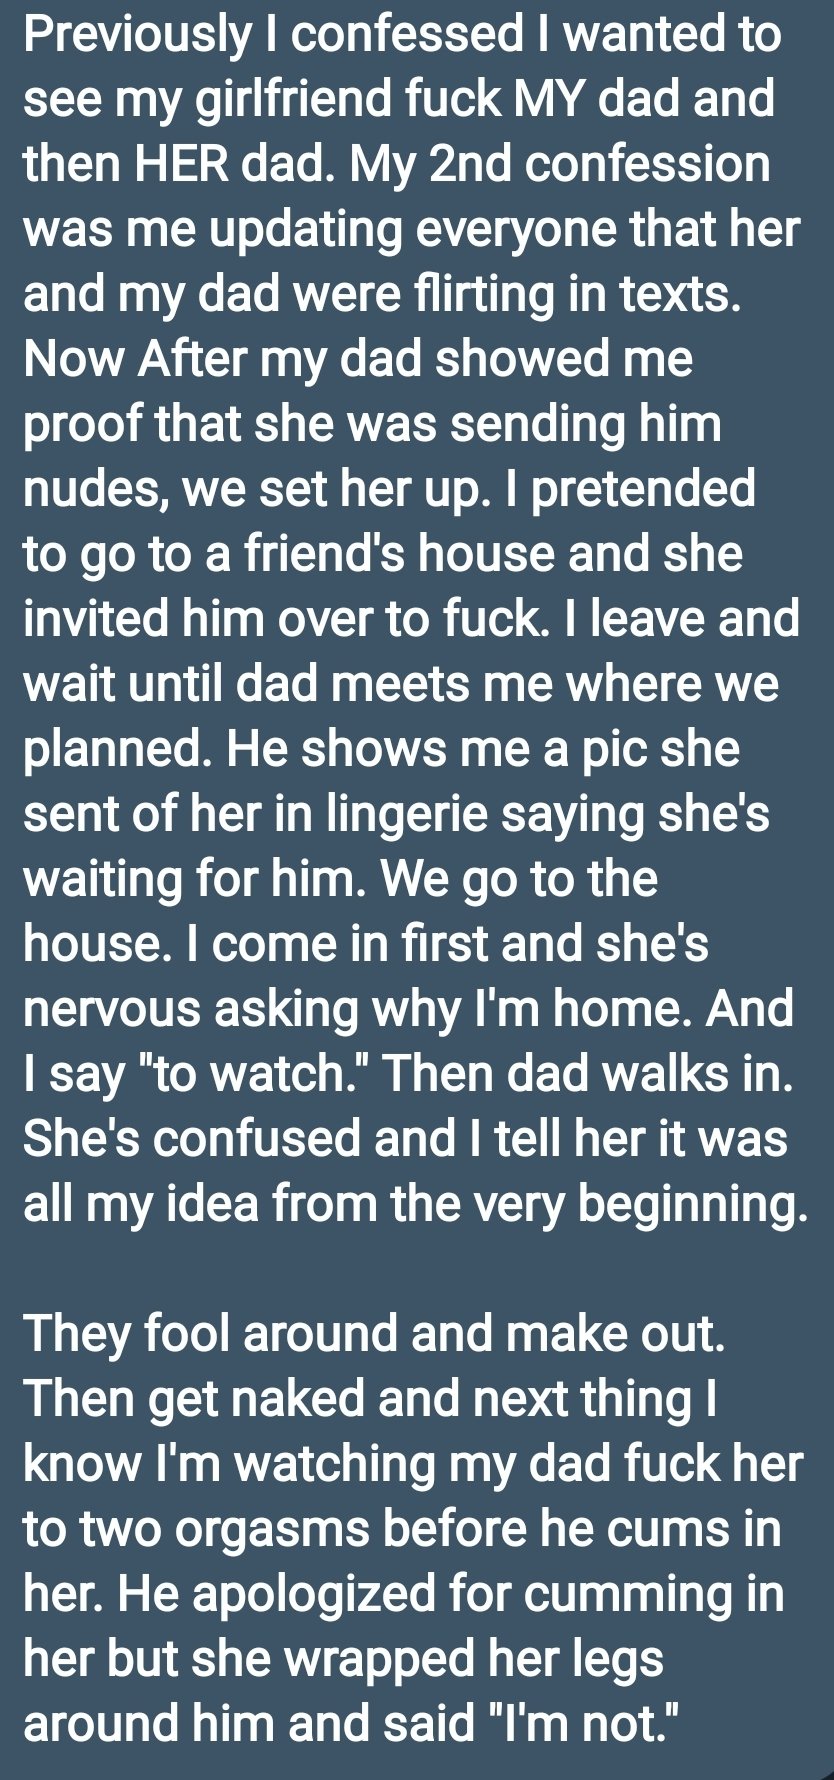 PervConfession on X picture